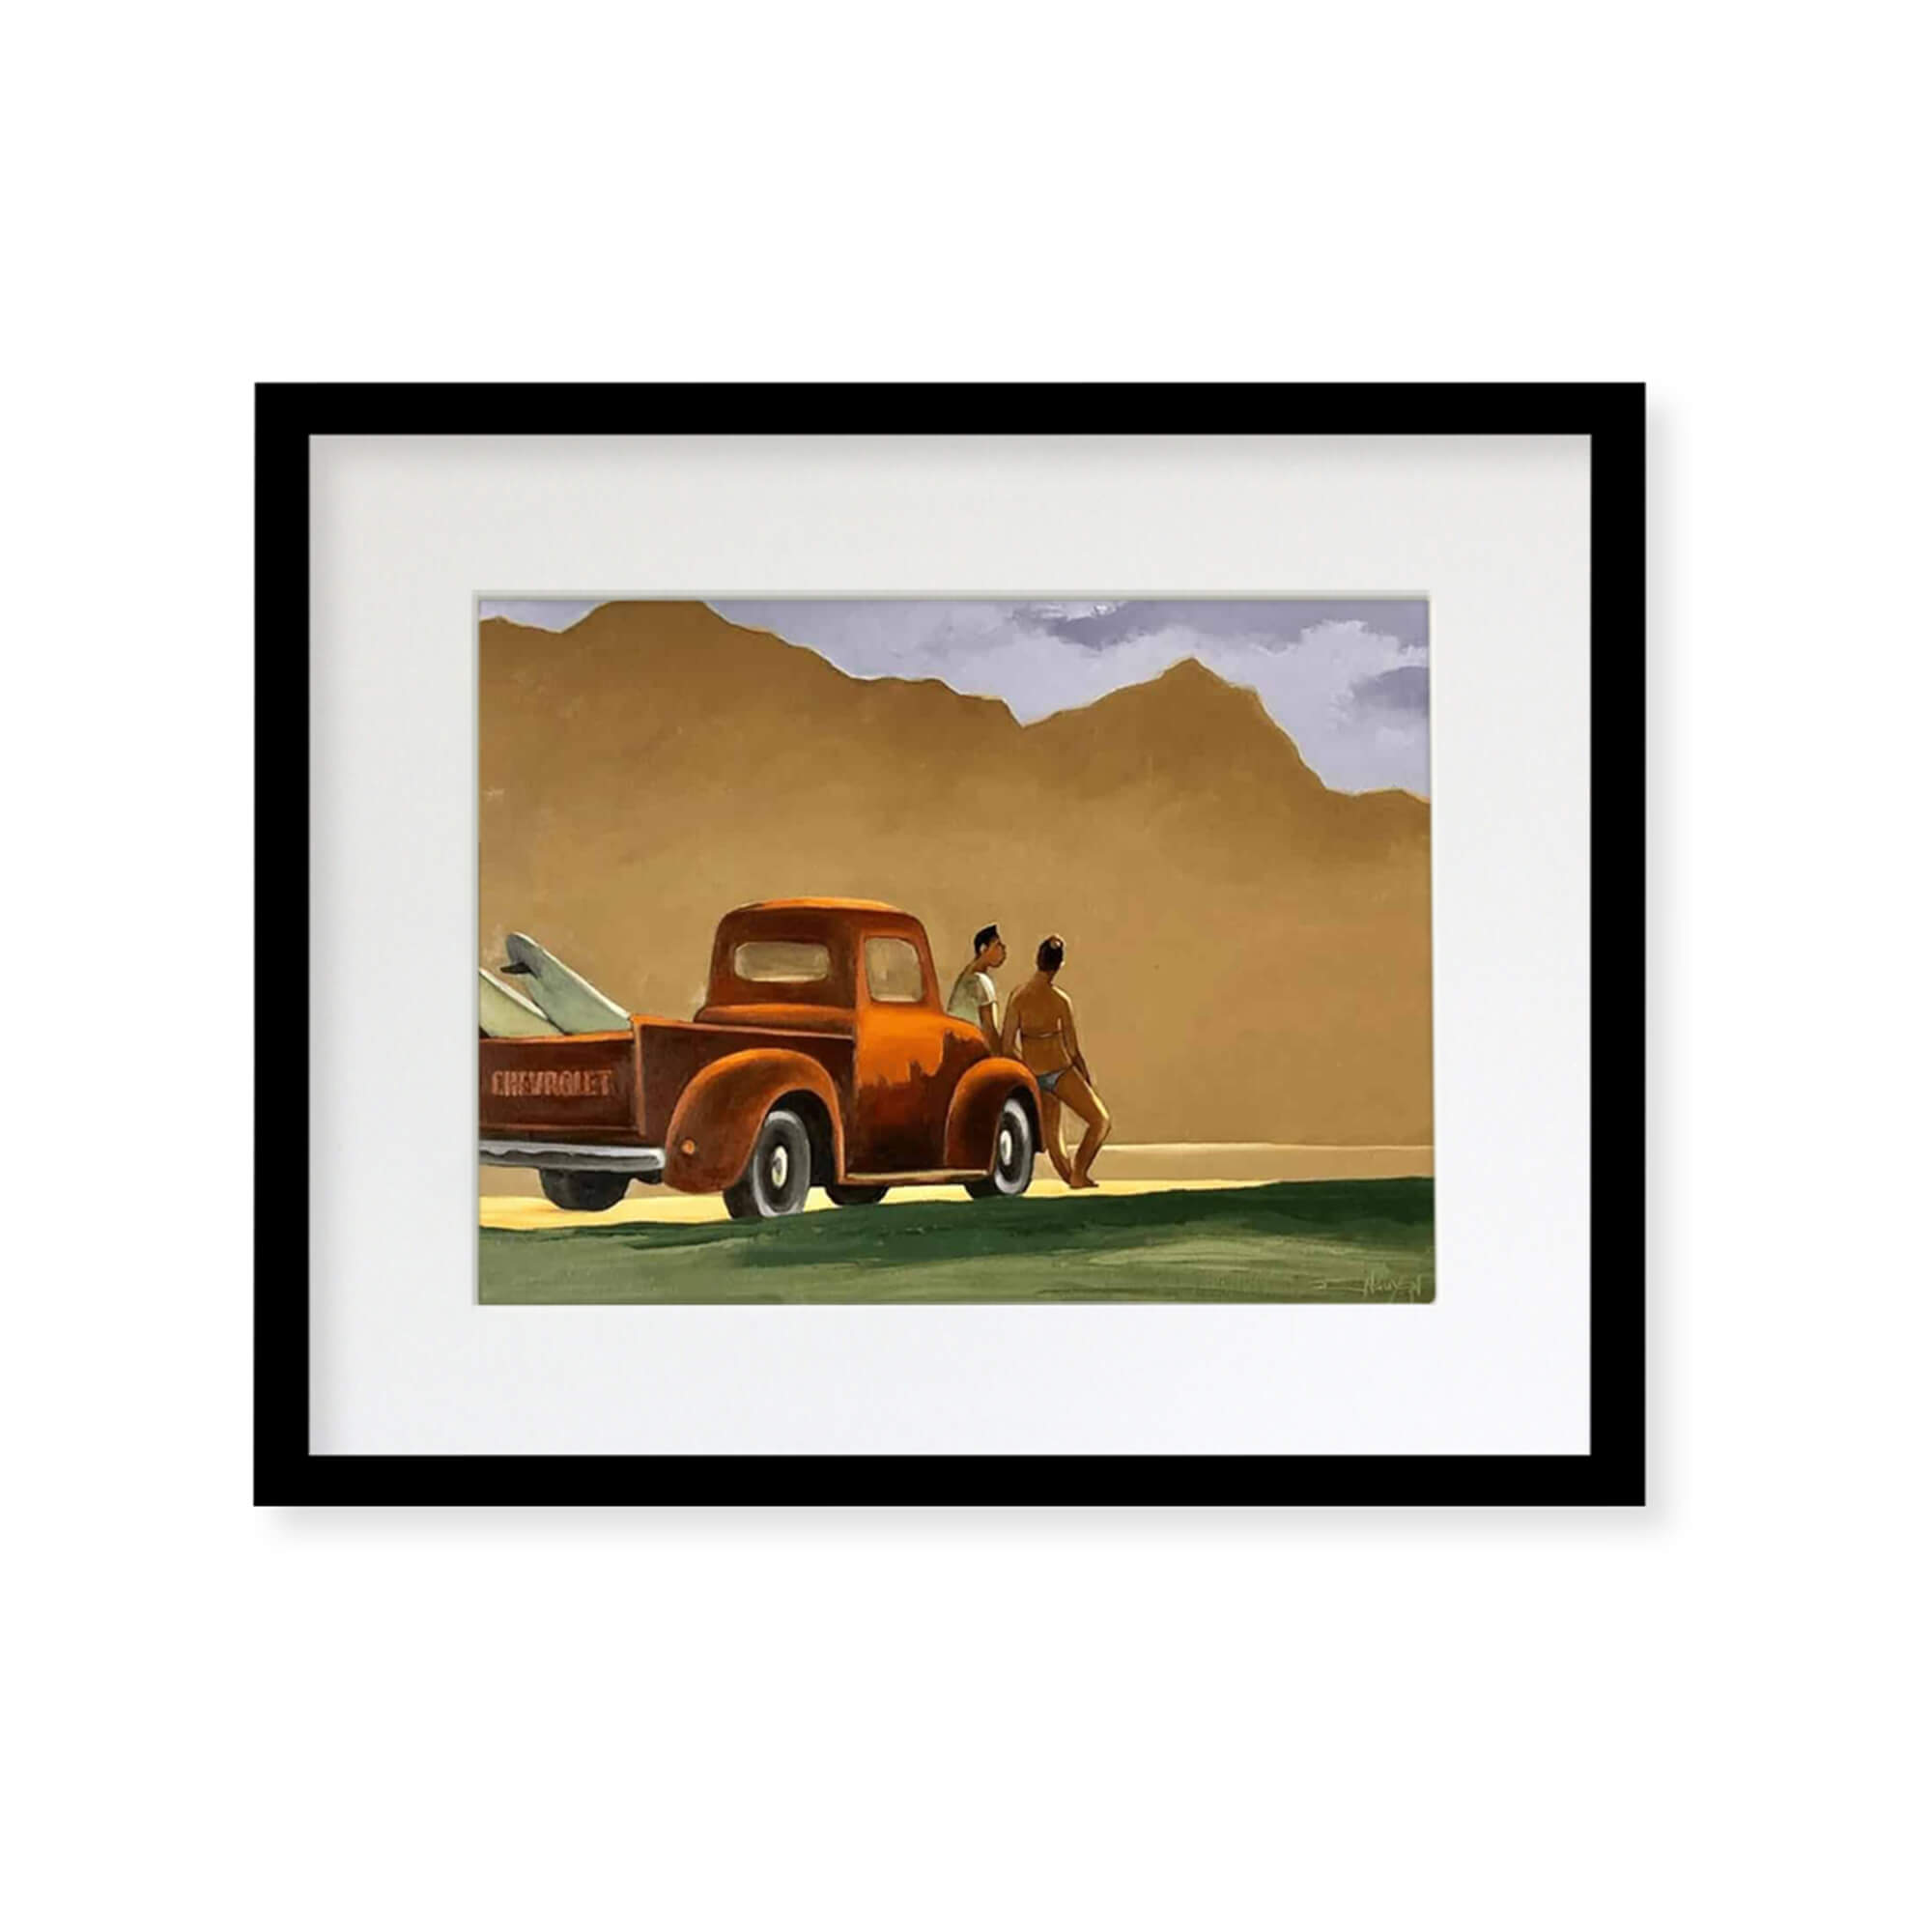 Framed matted art print of a local couple relaxing by their Chevrolet pickup after a surf session by Hawaii artist Tim Nguyen